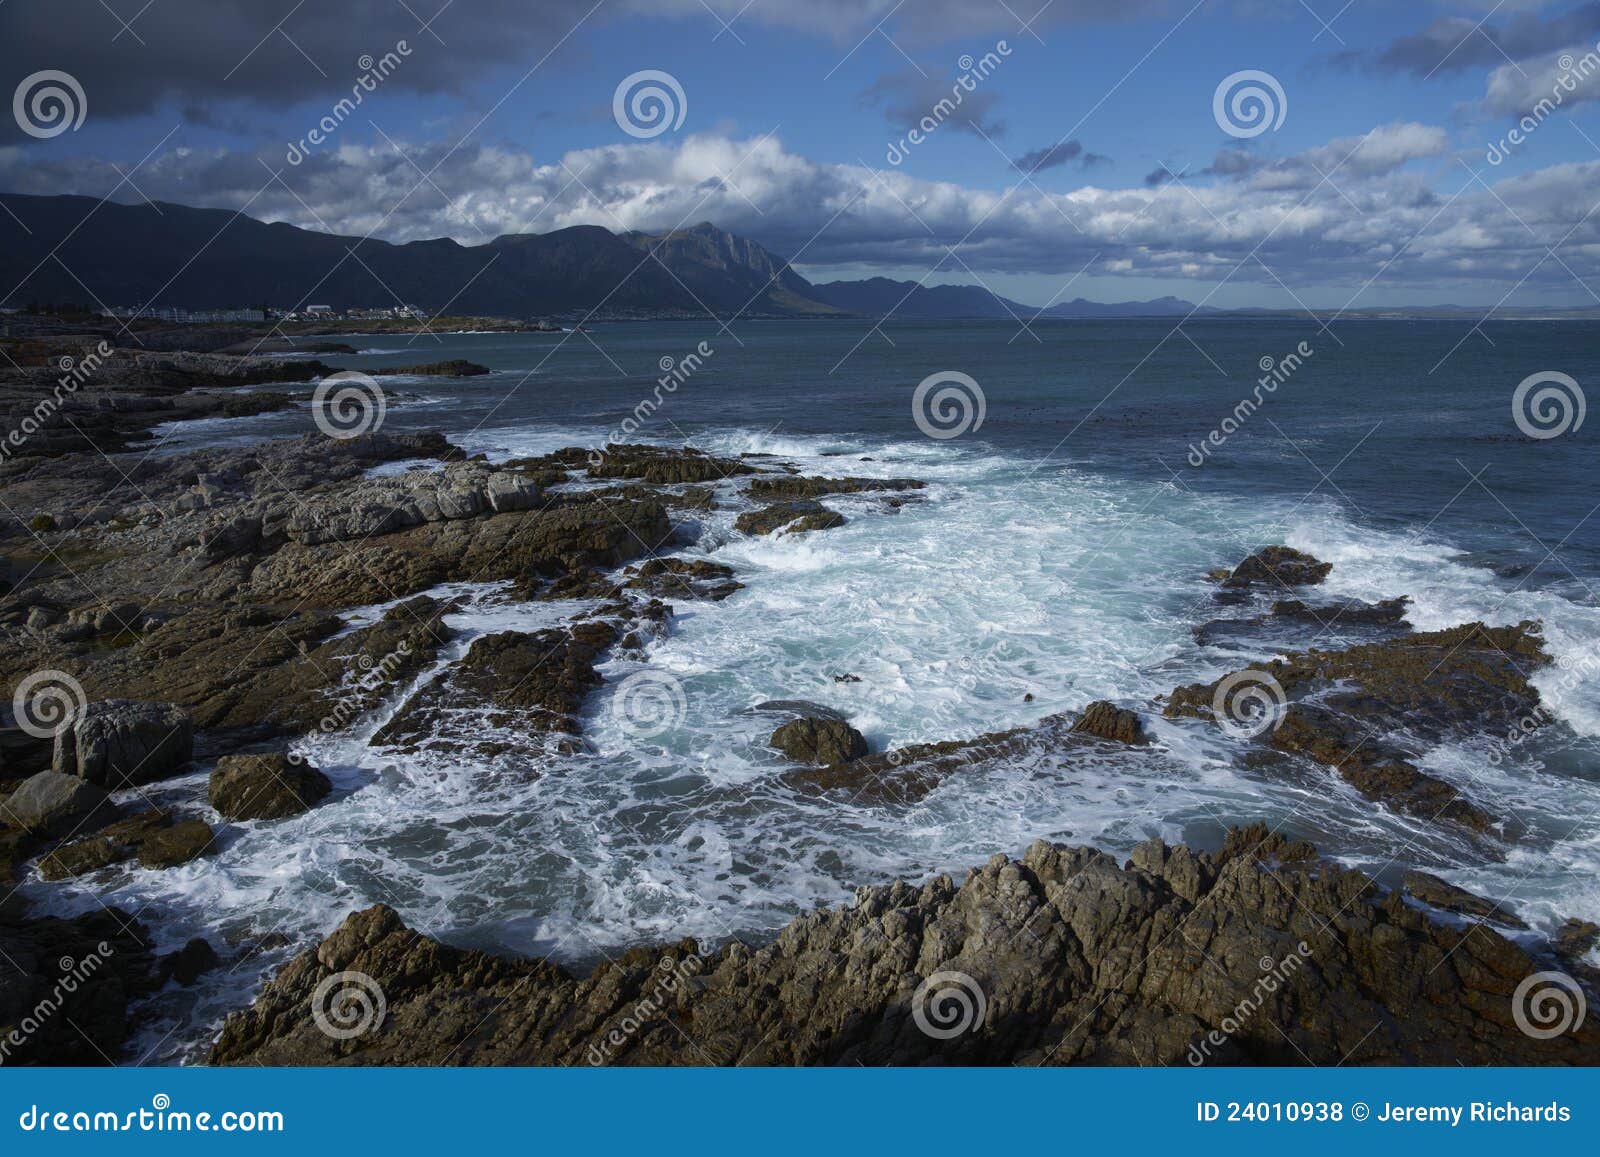 Whale Watching Capital Of South Africa Stock Photo - Image of cape